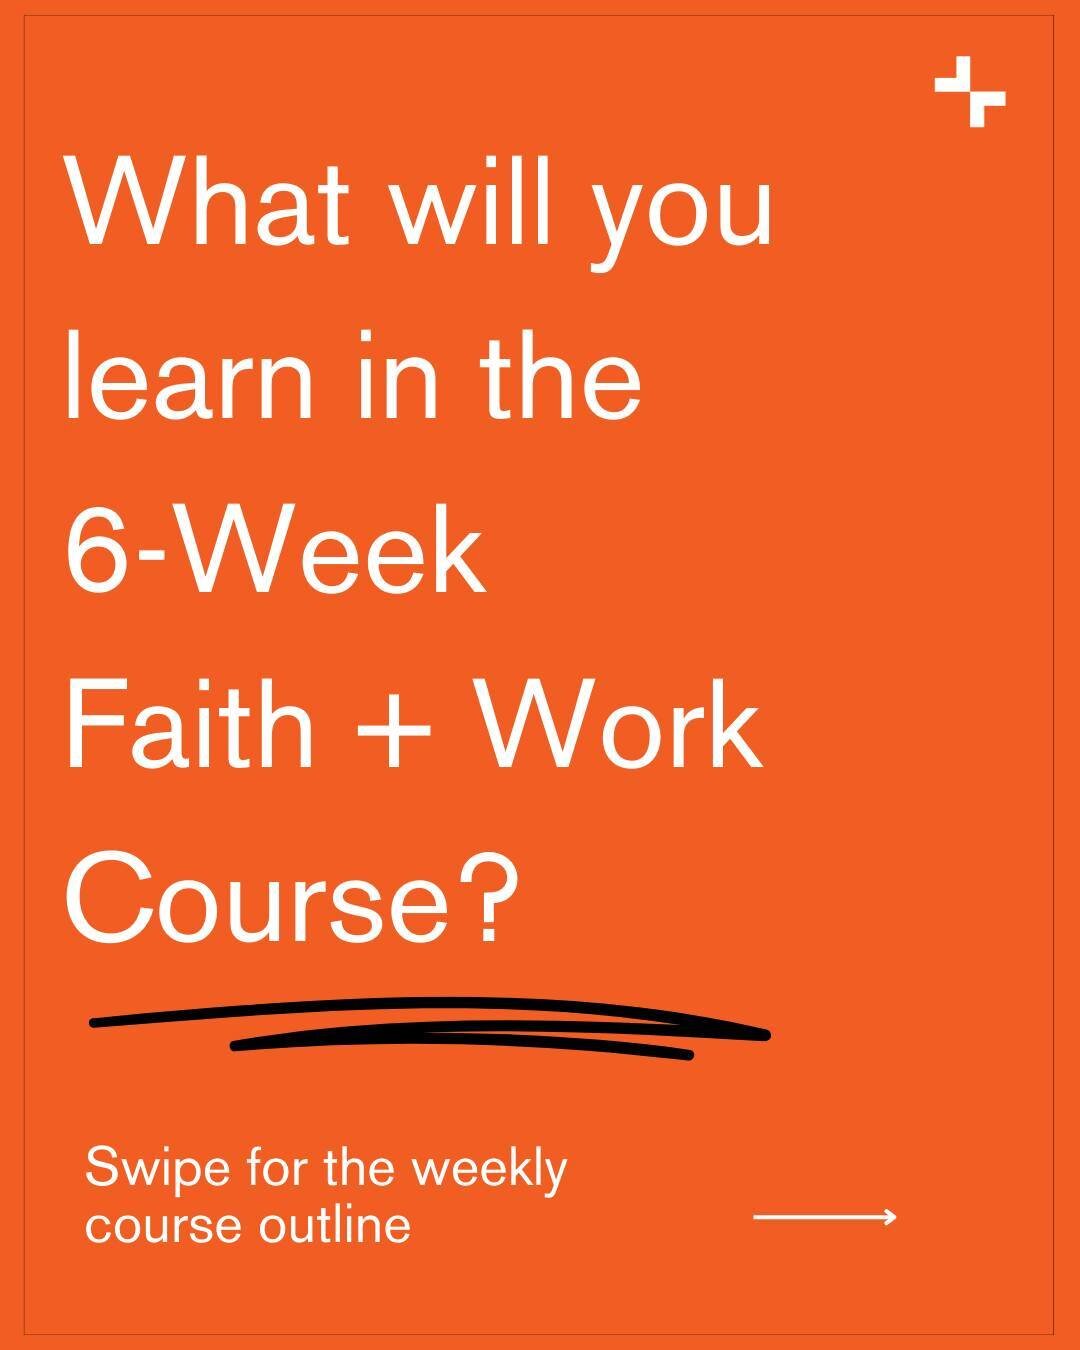 Are you curious about the 6-Week Faith + Work Course? Maybe seeking a little more information? Take a look at the weekly course outline for an overview of what will be covered. Our team is always available to answer any questions you may have as well